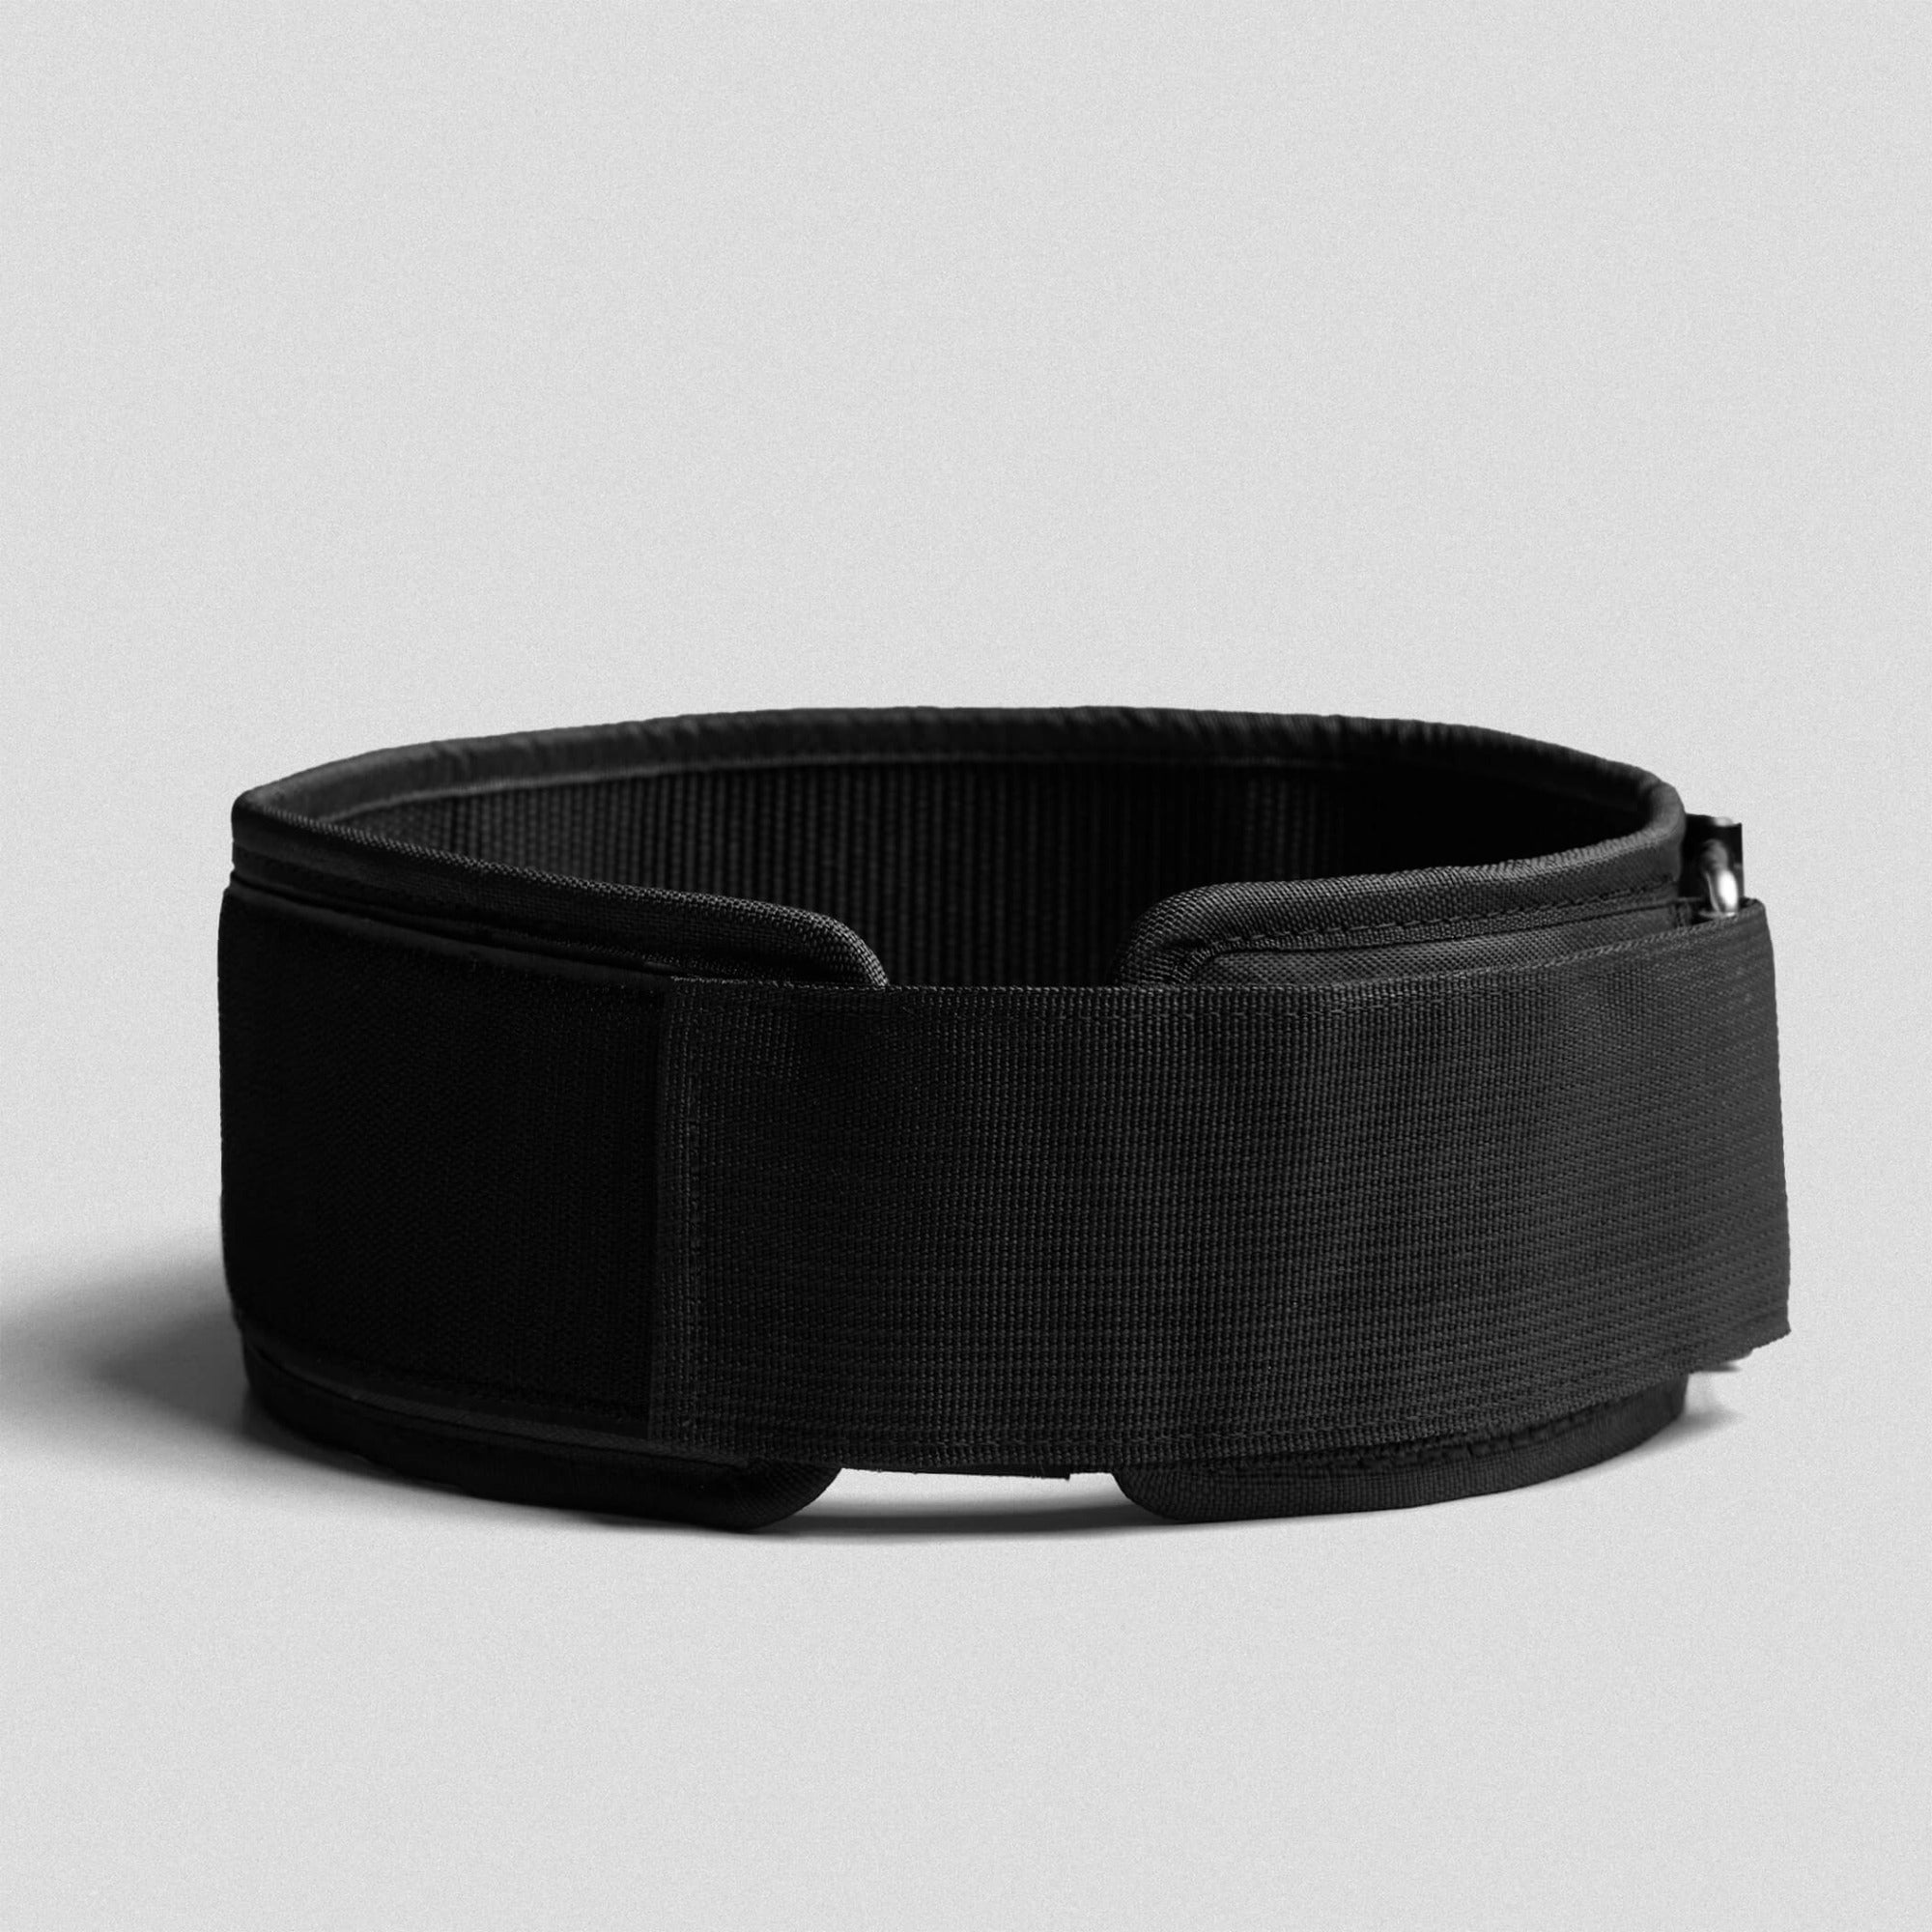 quick lock belt black white with patches strapped